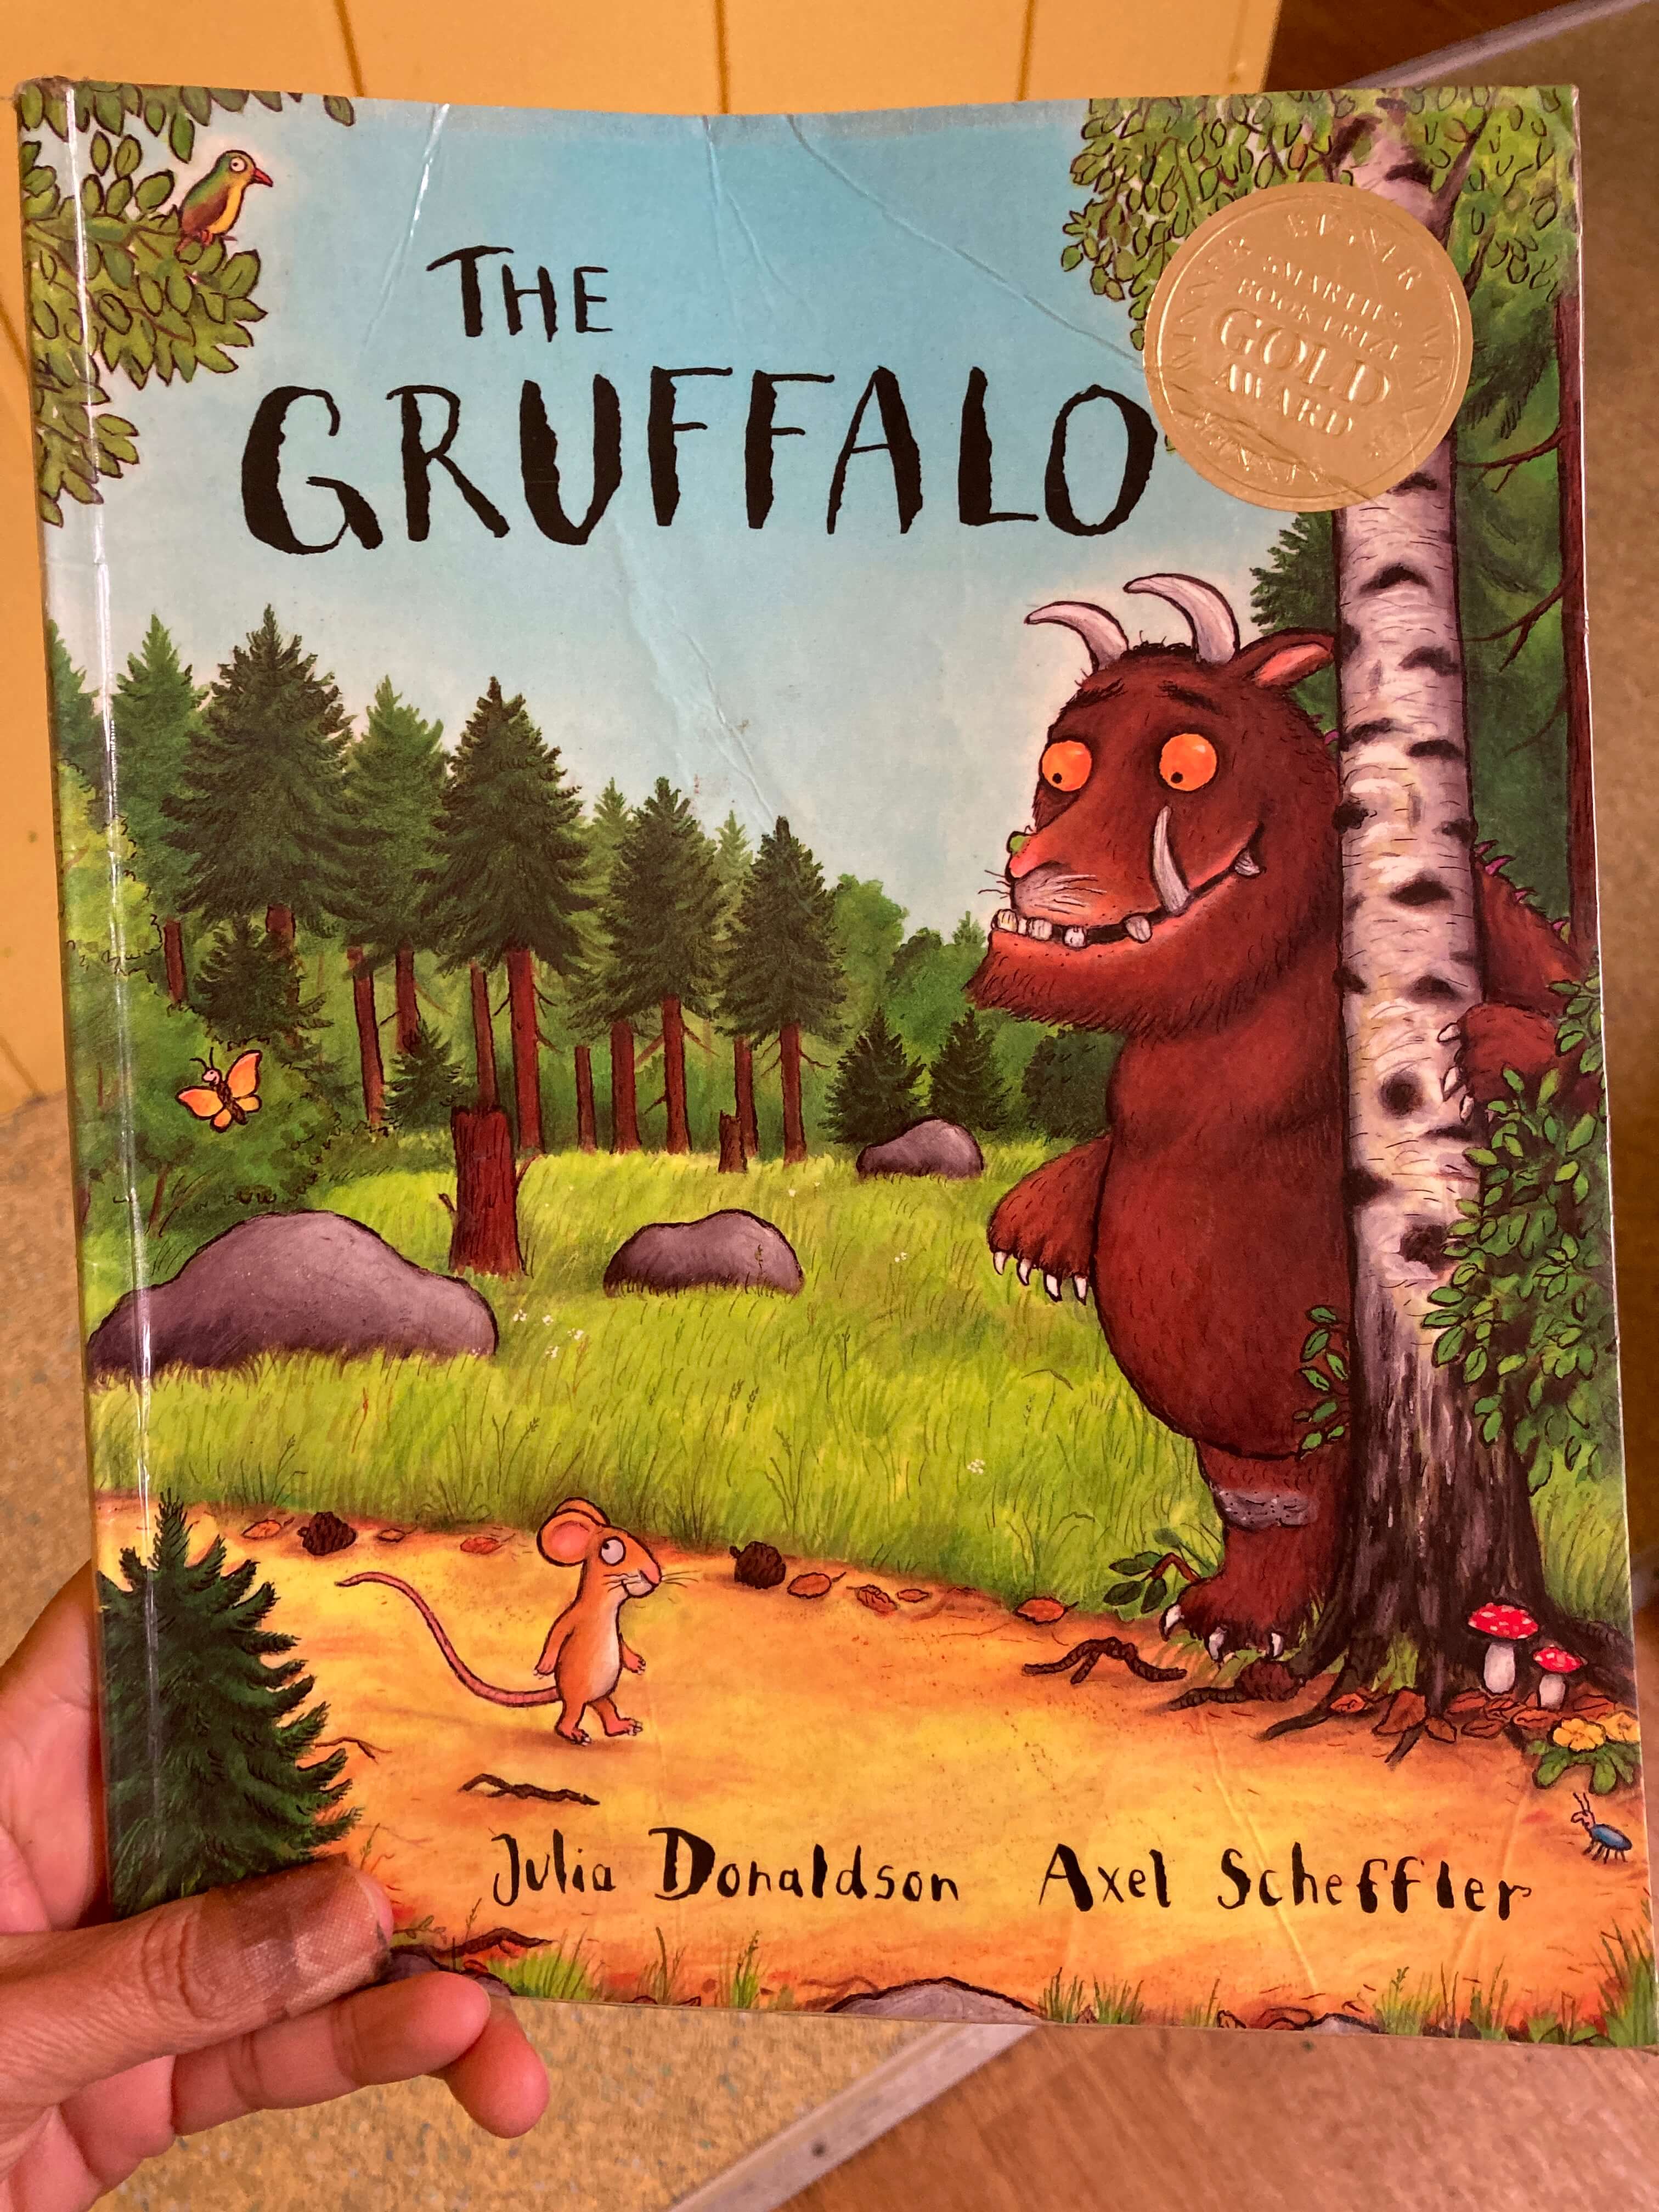 The Gruffalo Book for Friday favorites